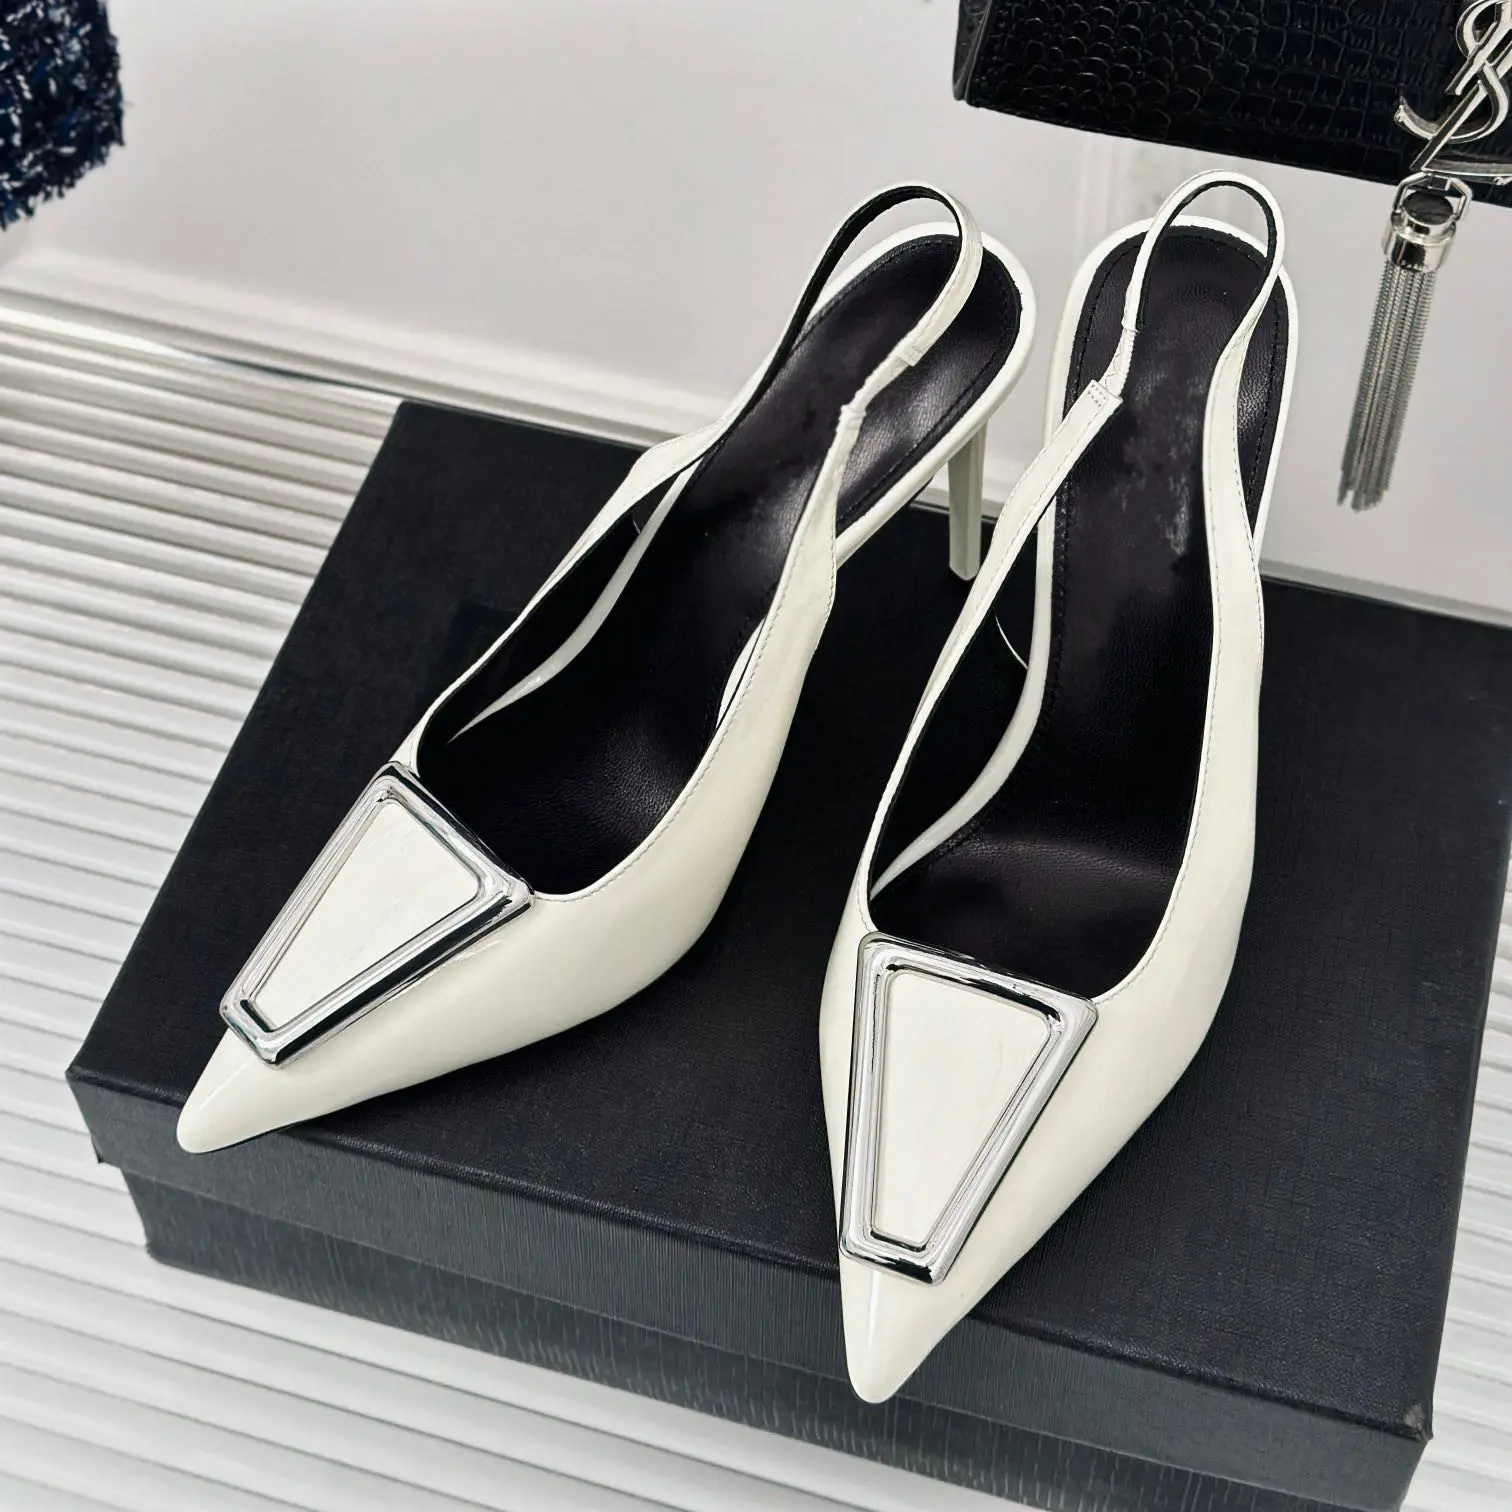 women high heels shoes closed toe sandals ladies sexy party shoes new stiletto fashion pumps woman casual office career shoes Casual Designer Fashion Women Shoes Sexy Lady White Patent Leather Strappy Pointy Toe High Heels Sandals Zapatos Mujer Sandals